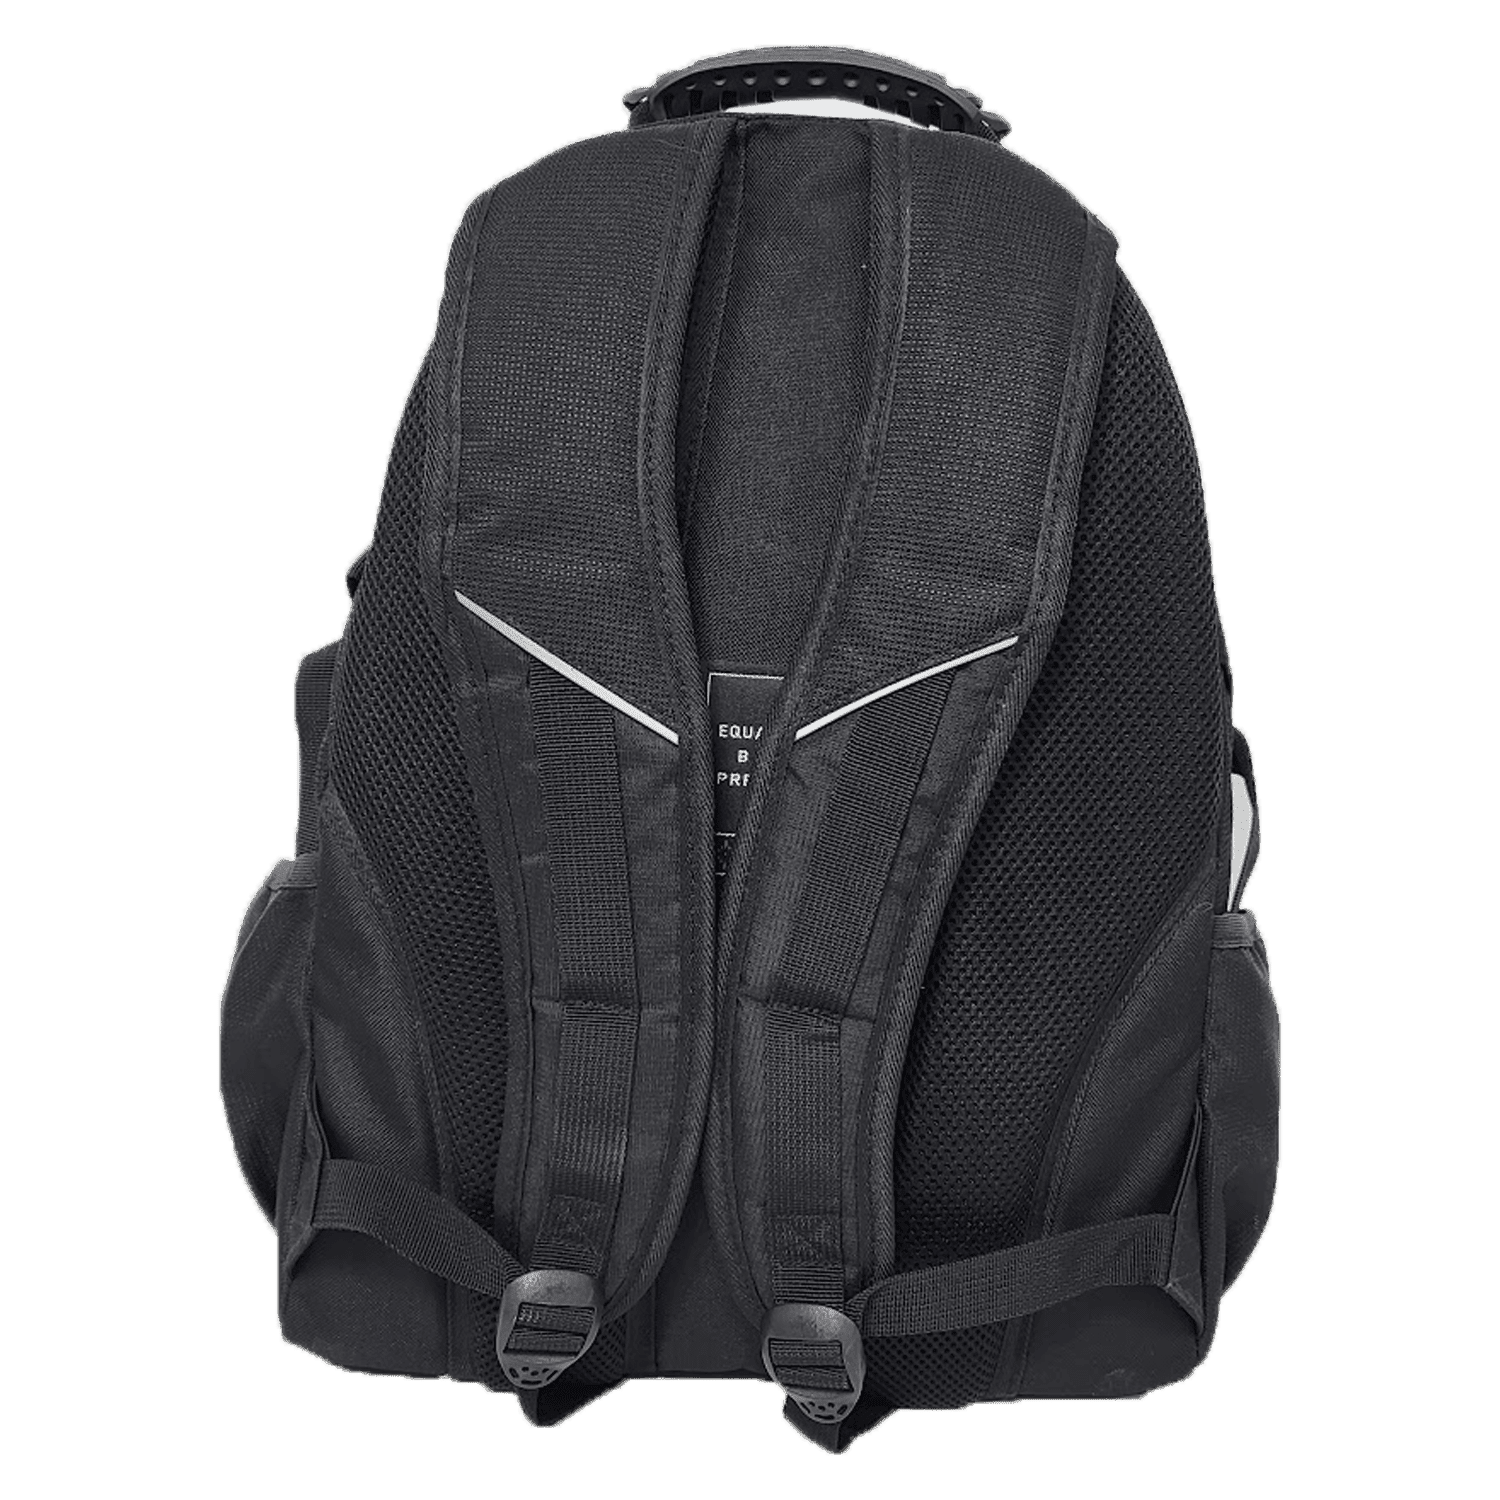 Sportech Ridge 53 – Bolton Backpack - Black/Red 4 Shaws Department Stores